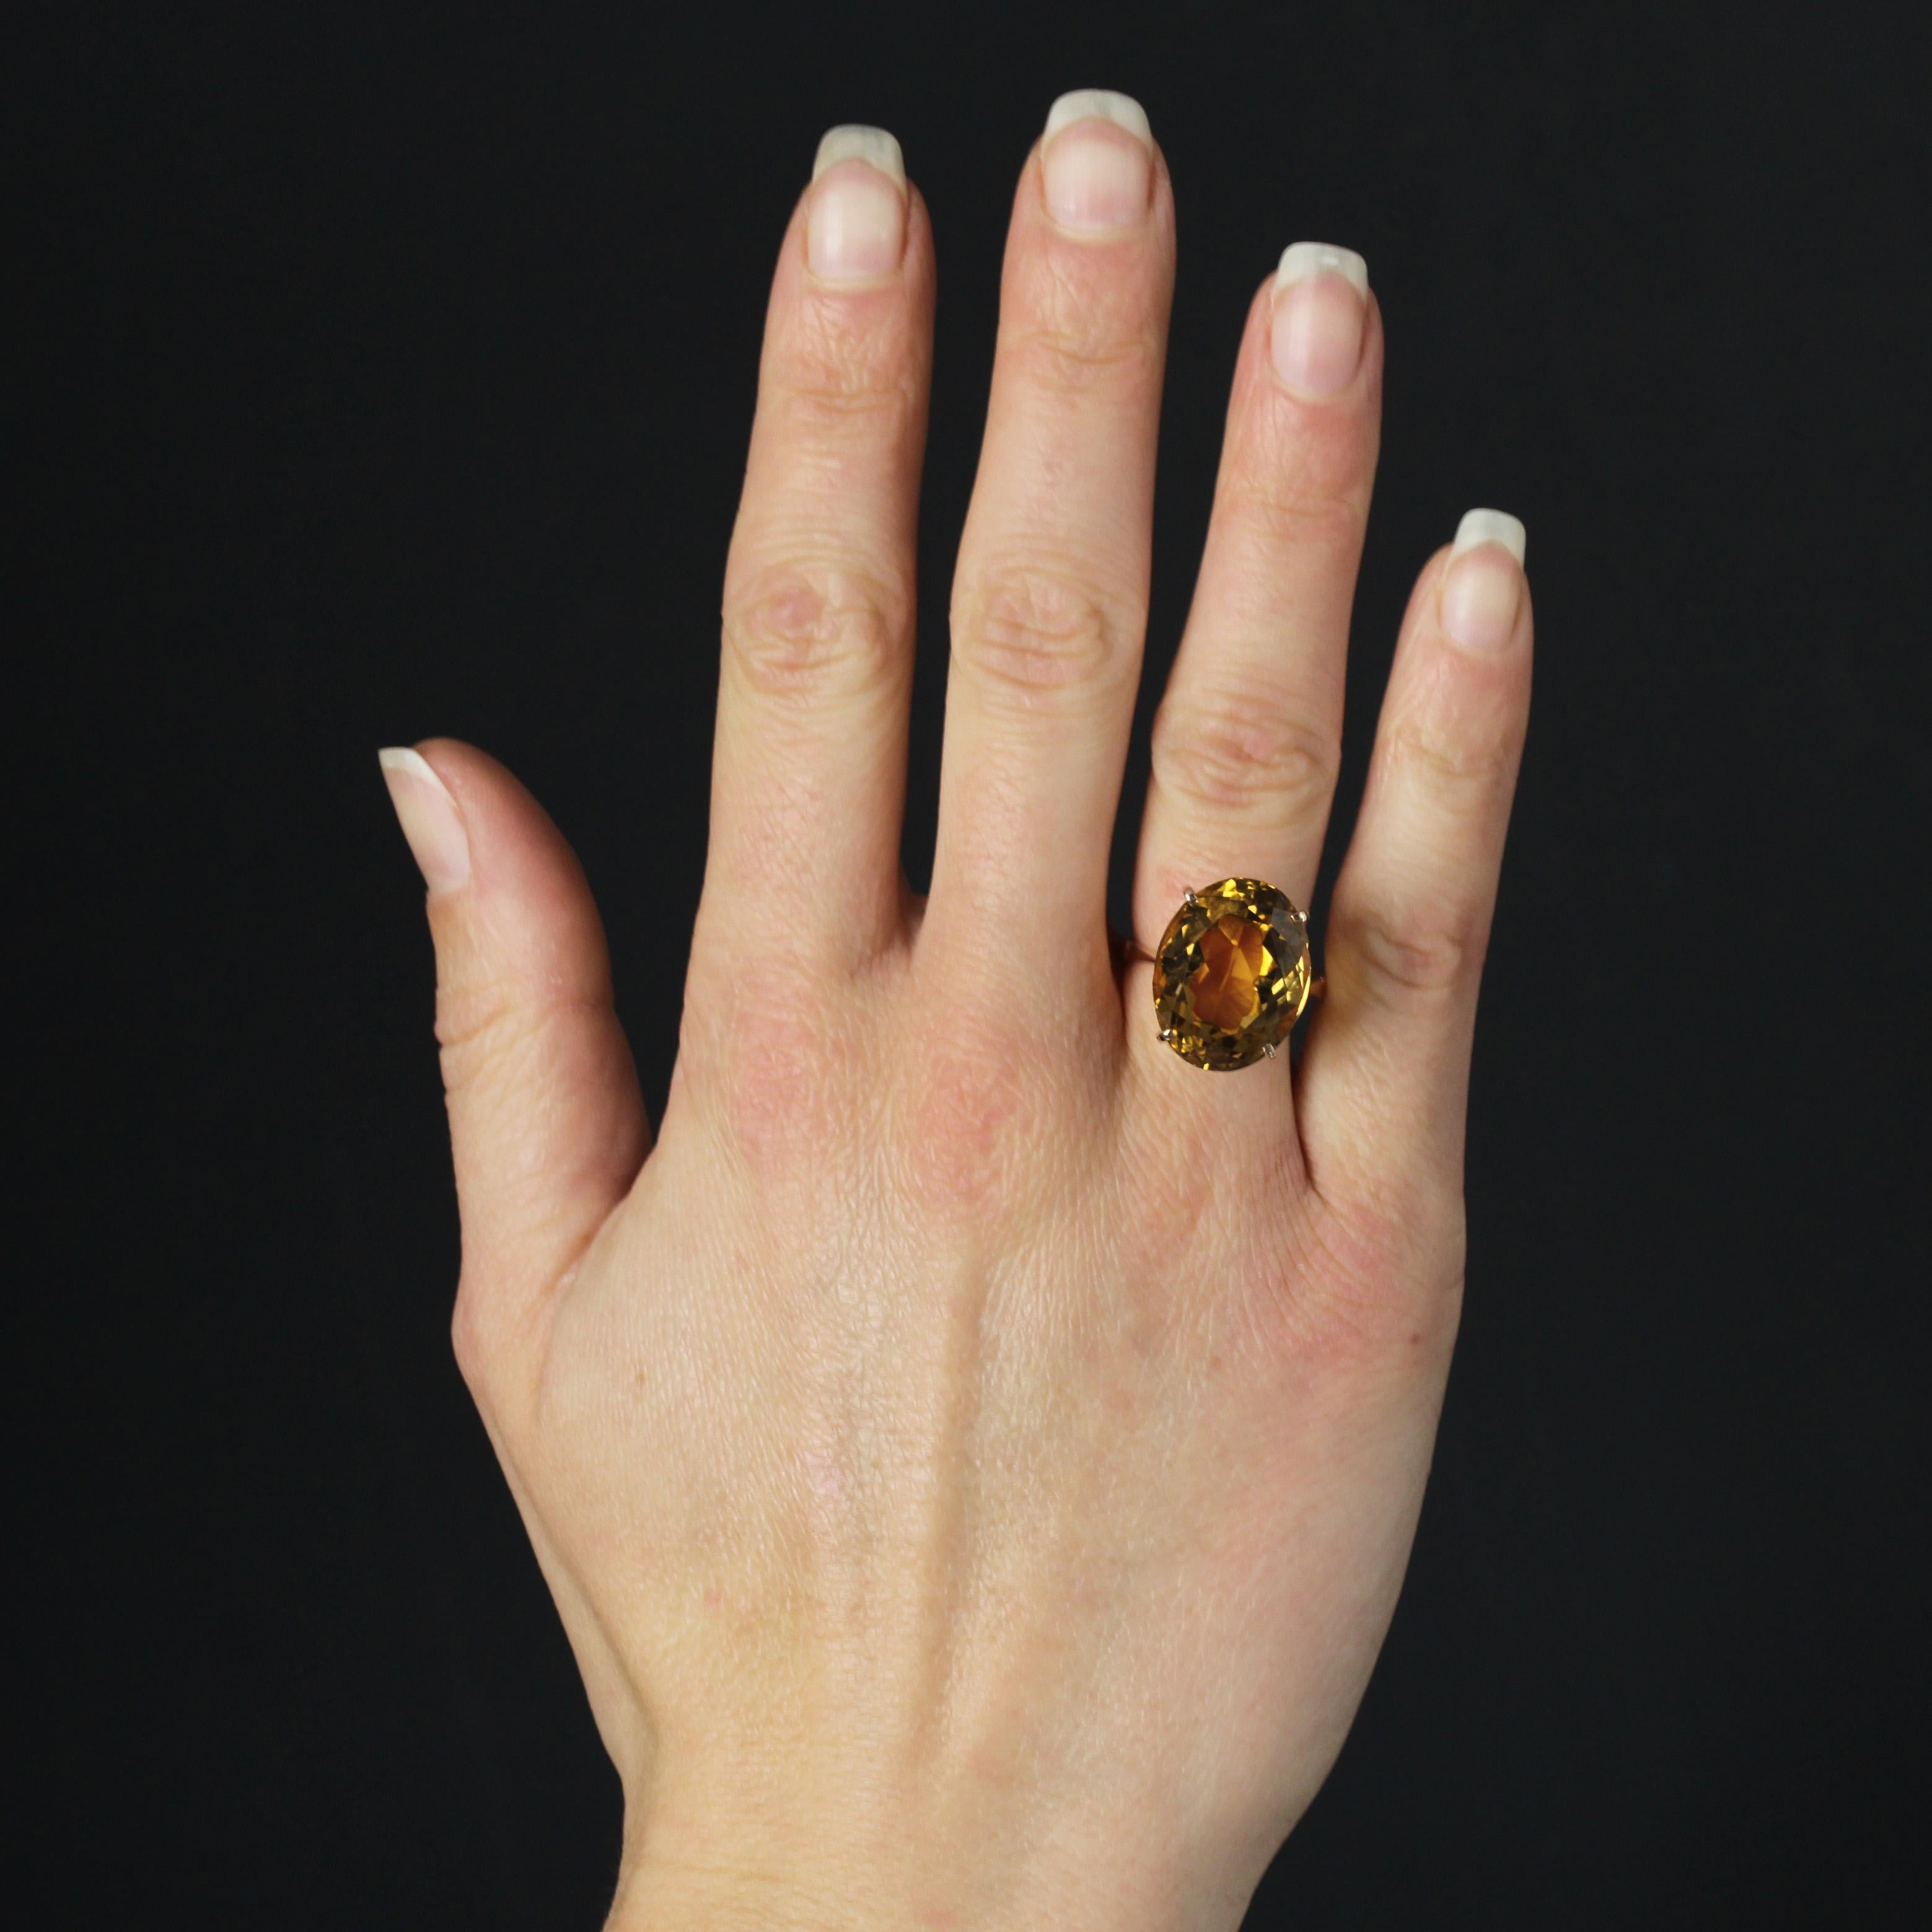 Ring in 18 karat yellow gold.
This vintage ring features a faceted oval citrine held in place by 4 sharpened claws on a raised basket.
Weight of the citrine : 12 carats approximately. 
Height : 18 cm approximately, width : 14,2 mm, thickness : 10,8